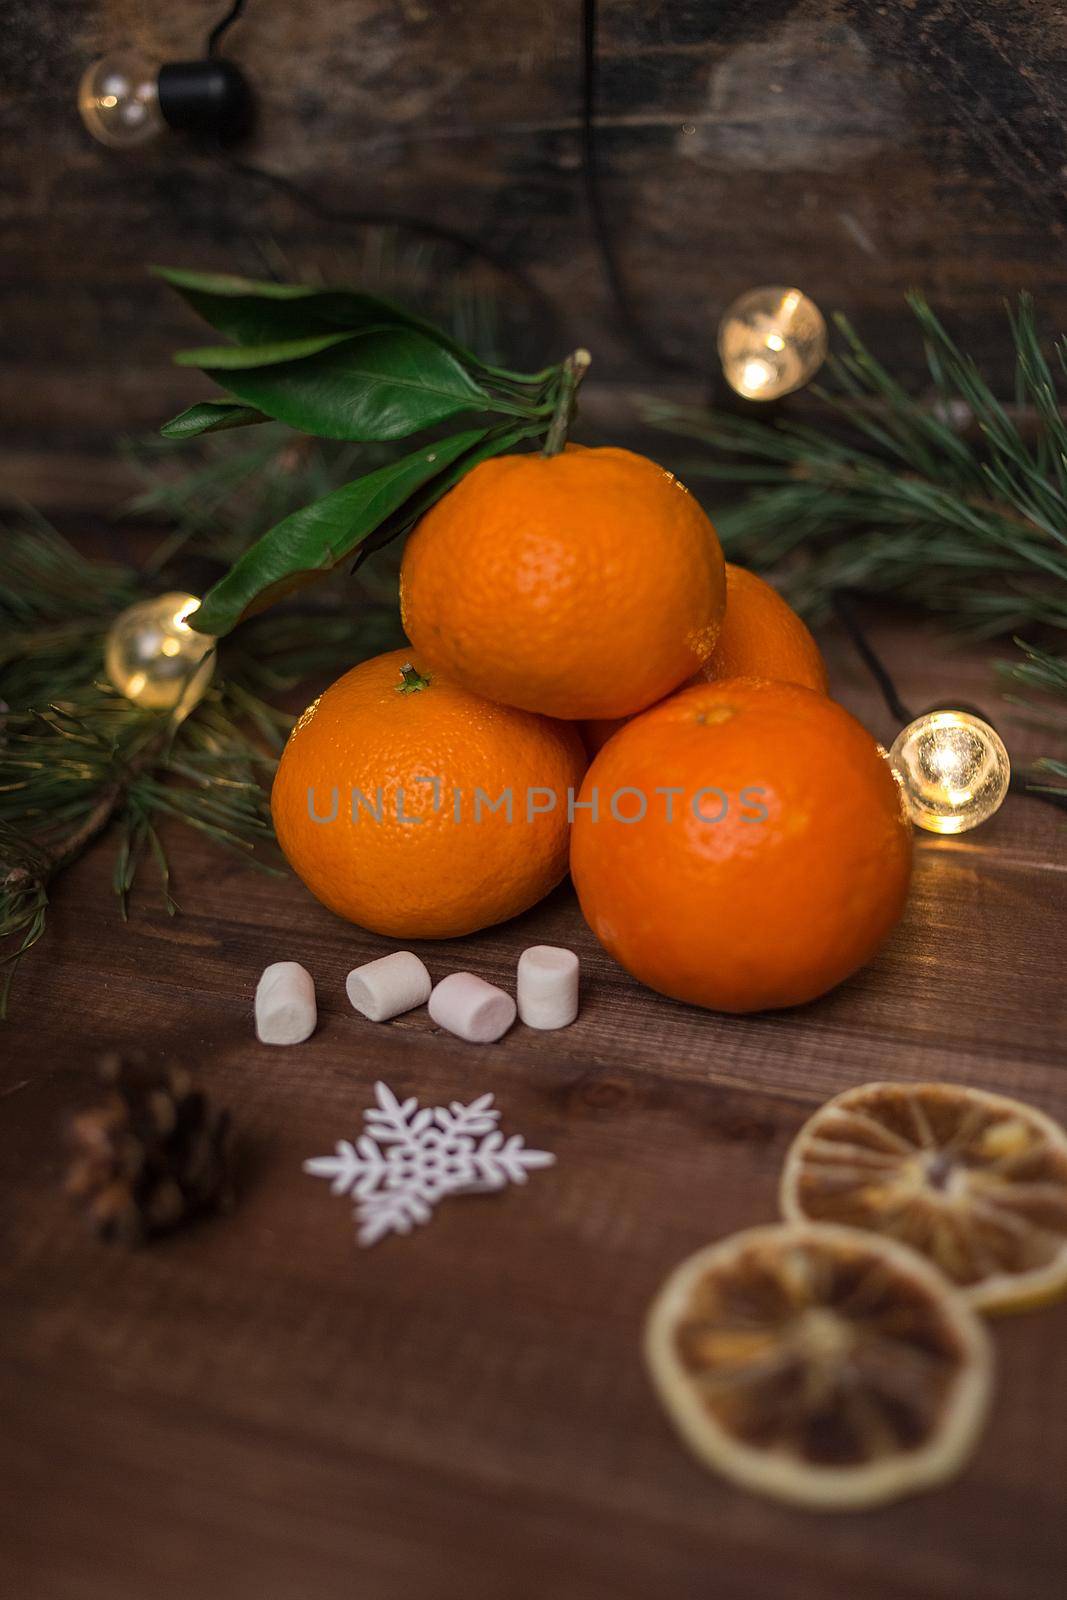 Christmas still life with fresh mandarines, marshmallows and garland on wooden background. Nature New Year concept in instagram style.